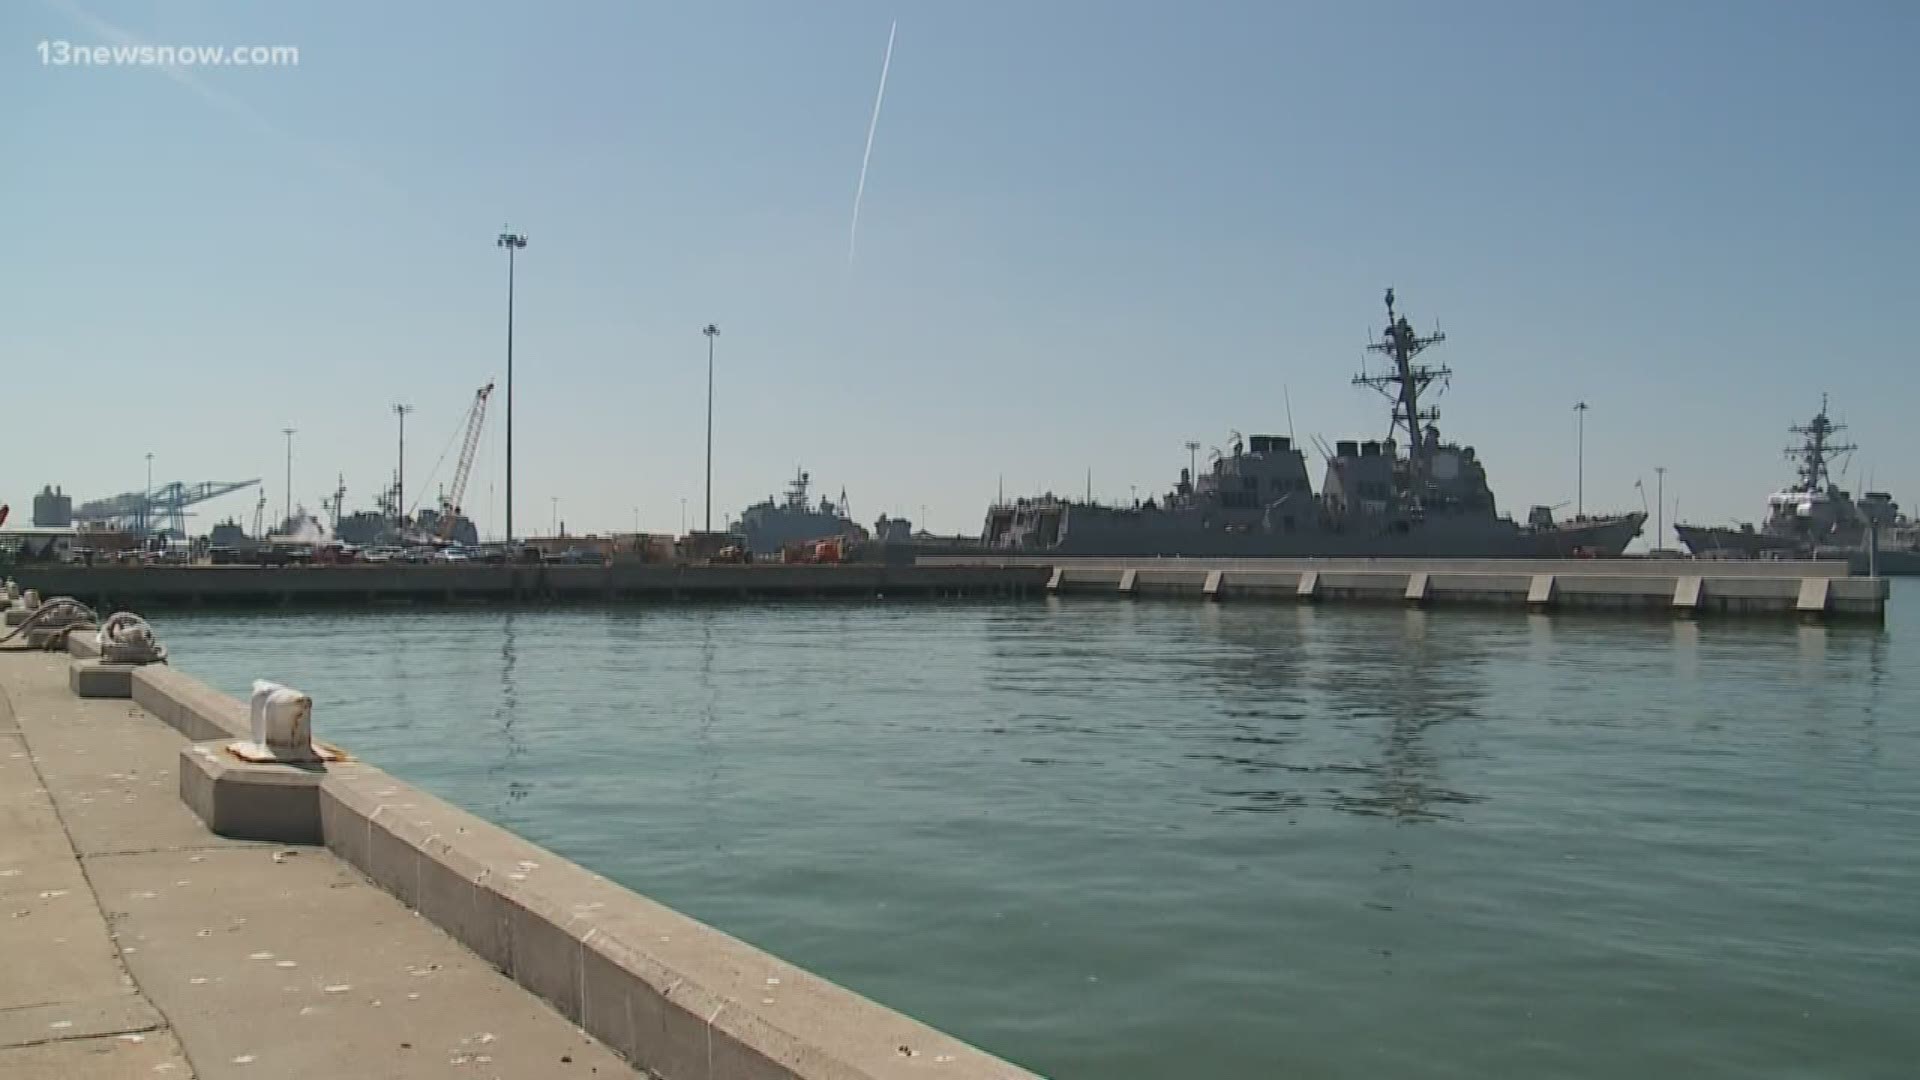 Naval Station Norfolk is surrounded by the Elizabeth and James Rivers and Chesapeake Bay, and experiences flooding in and around the facility often. A U.N. report on climate change found that water levels in Hampton Roads have risen 18 inches in the last 100 years, and  predicts they will rise 5 more feet by the year 2100.